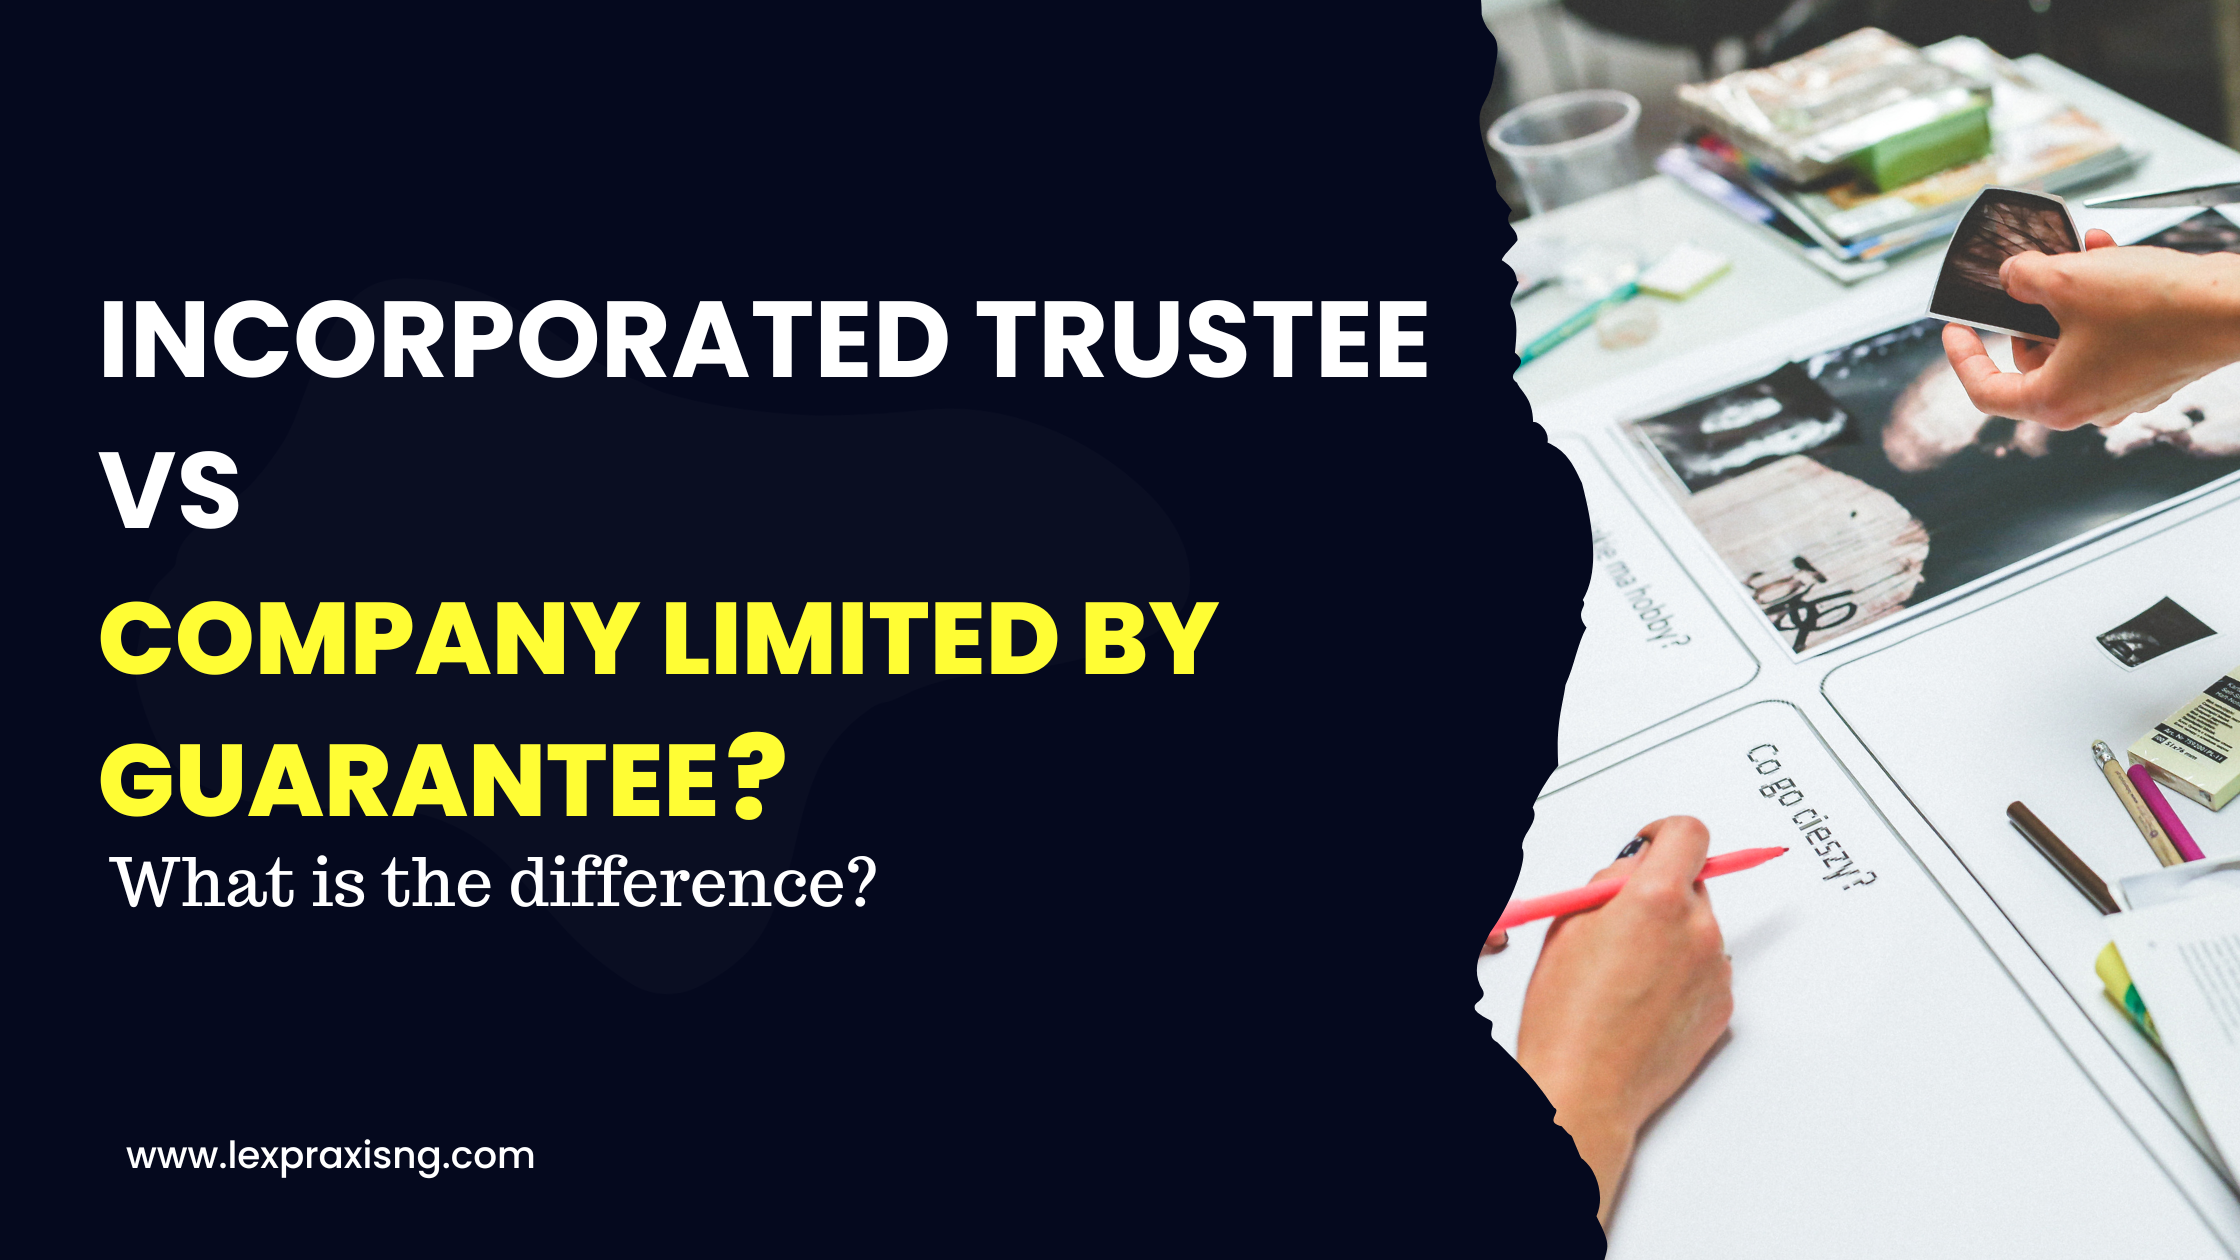 WHAT IS THE DIFFERENCE BETWEEN A COMPANY LIMITED BY GUARANTEE AND AN INCORPORATED TRUSTEE